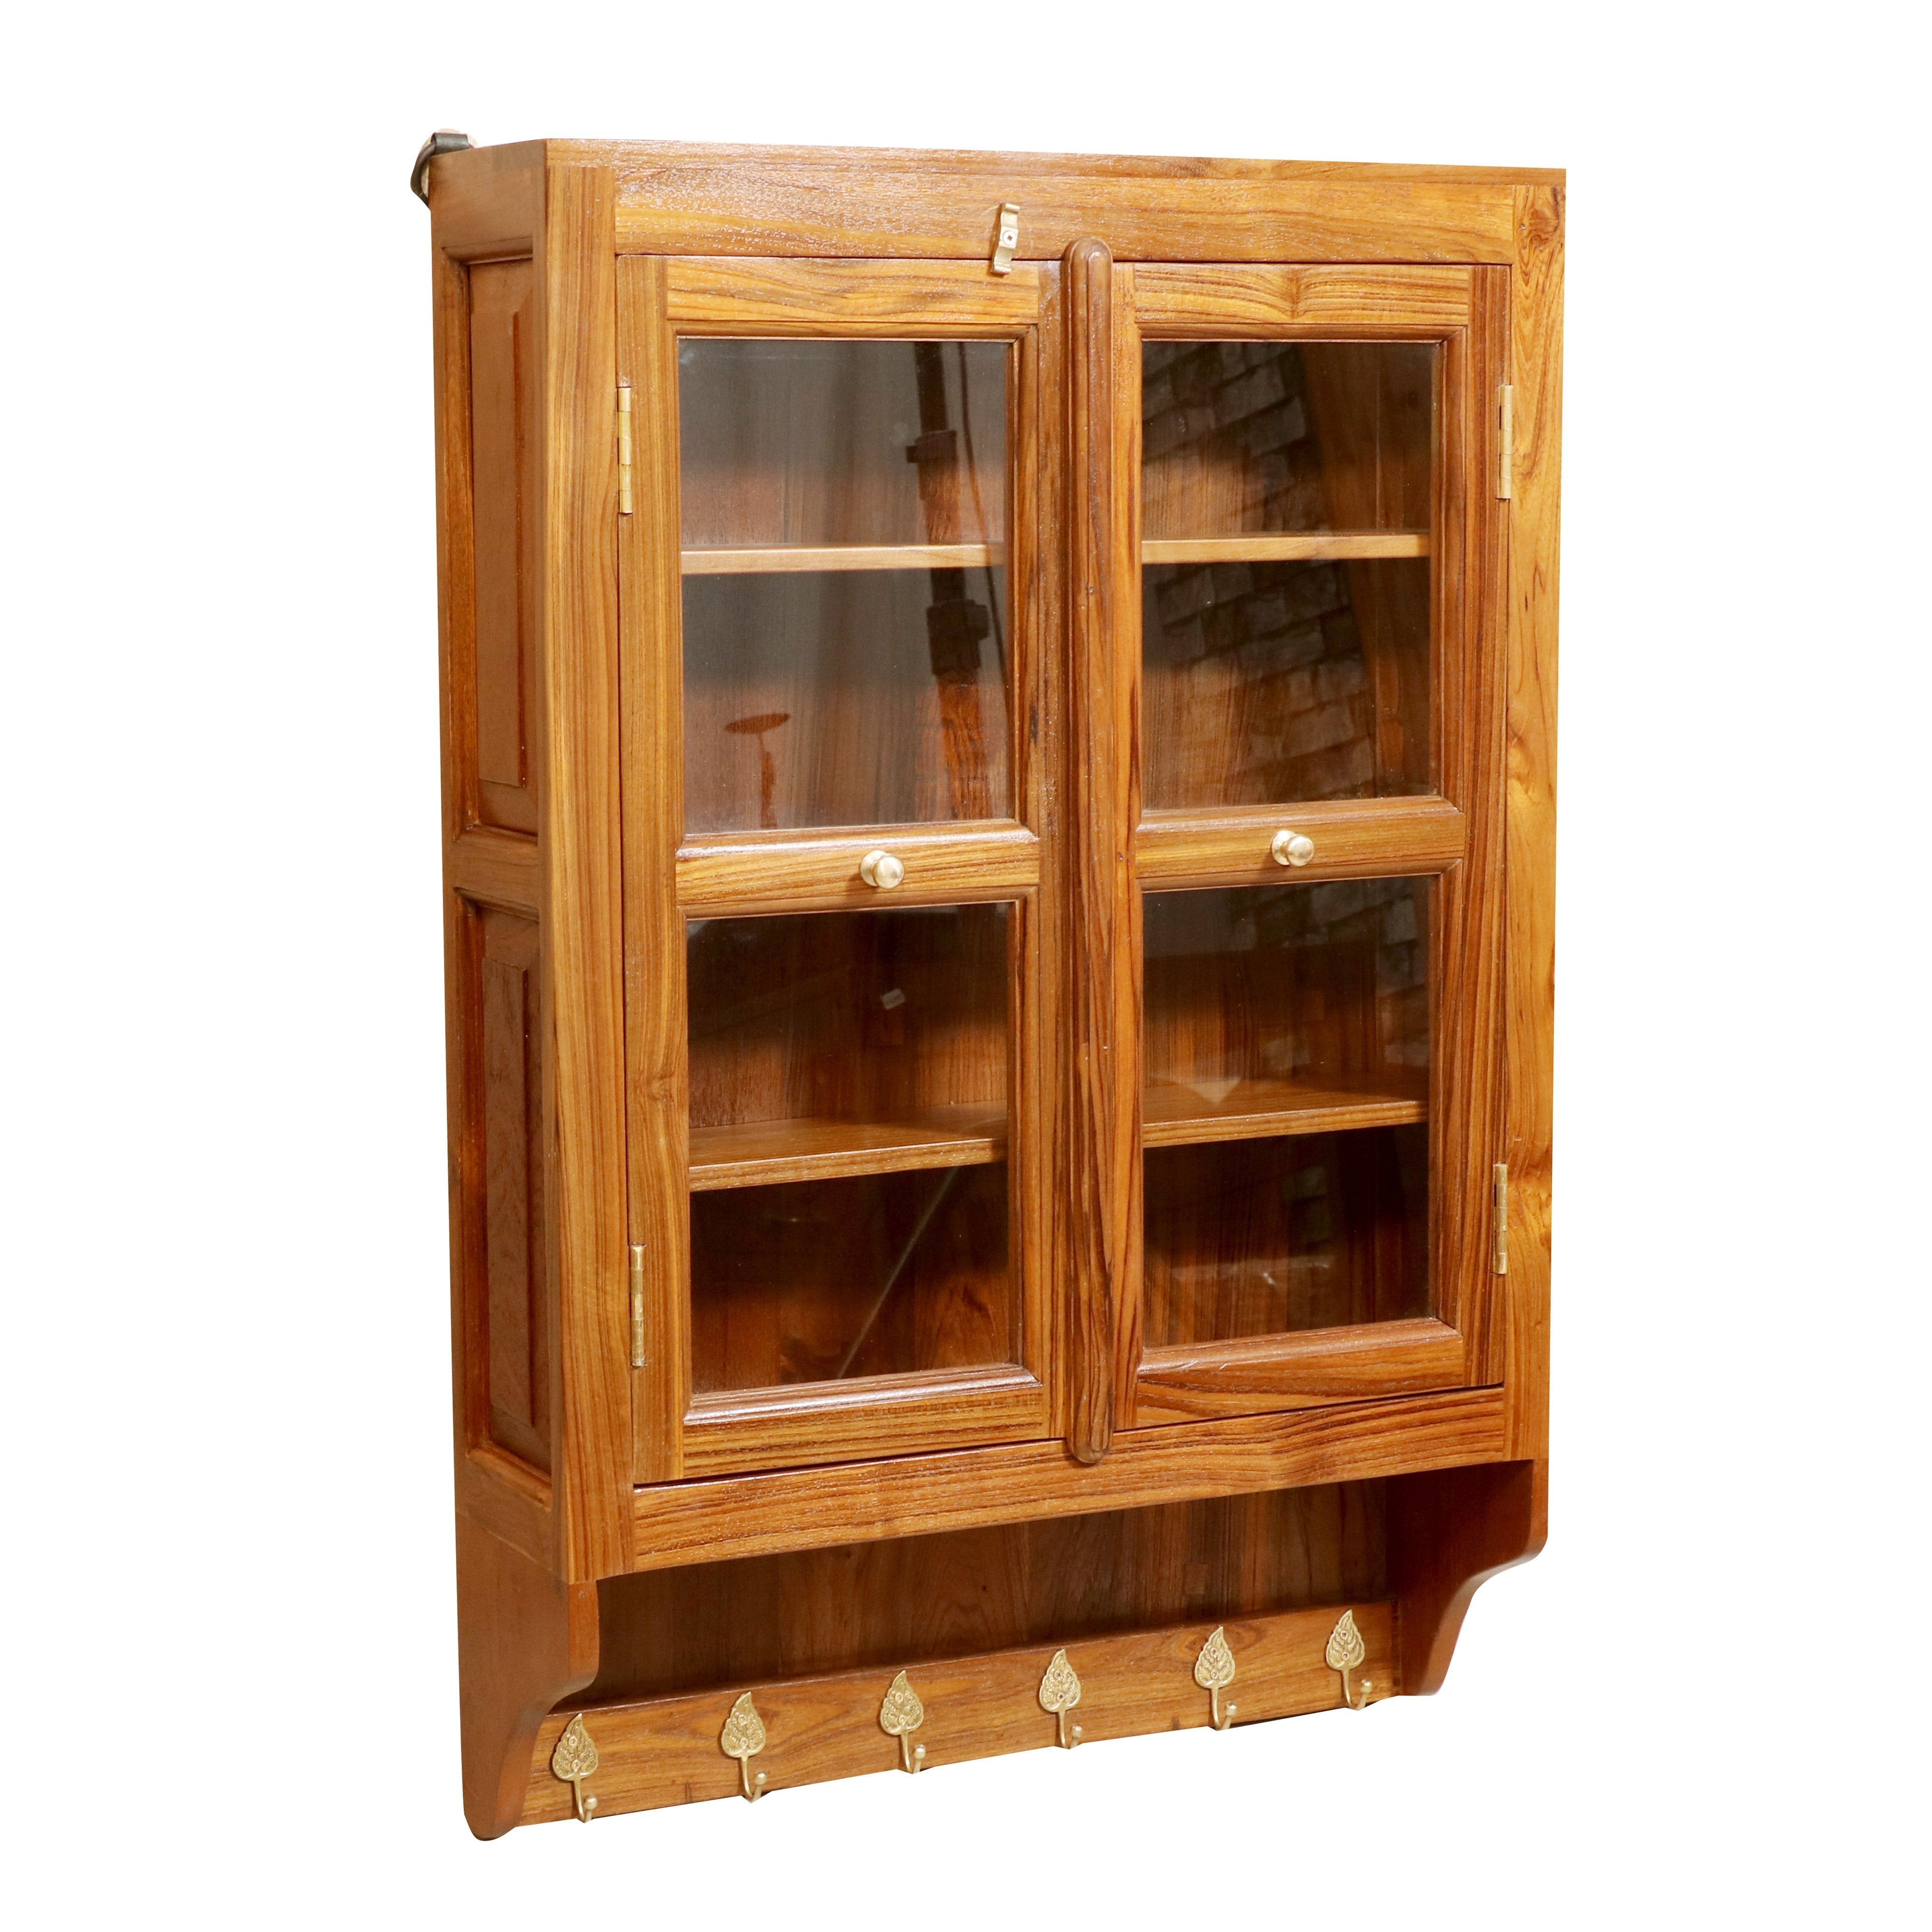 24 x 7 x 36 Inch Glass and Teak Wooden Wall Cabinet Wall Cabinet